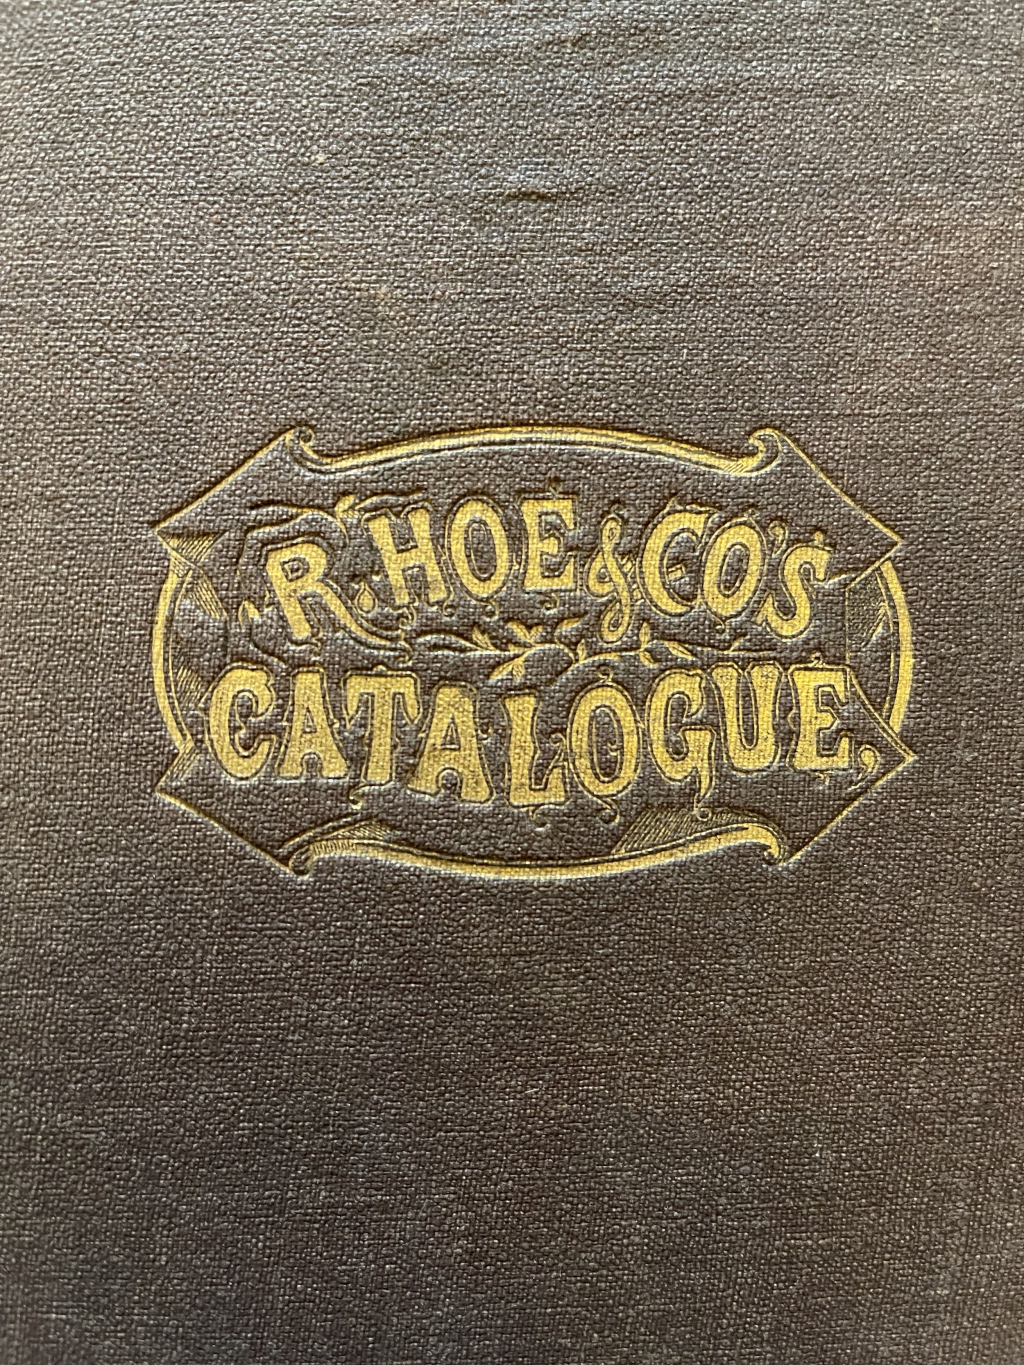 The logo stamped in the center of the upper cover of Hoe's 1873 large quarto format catalogue.